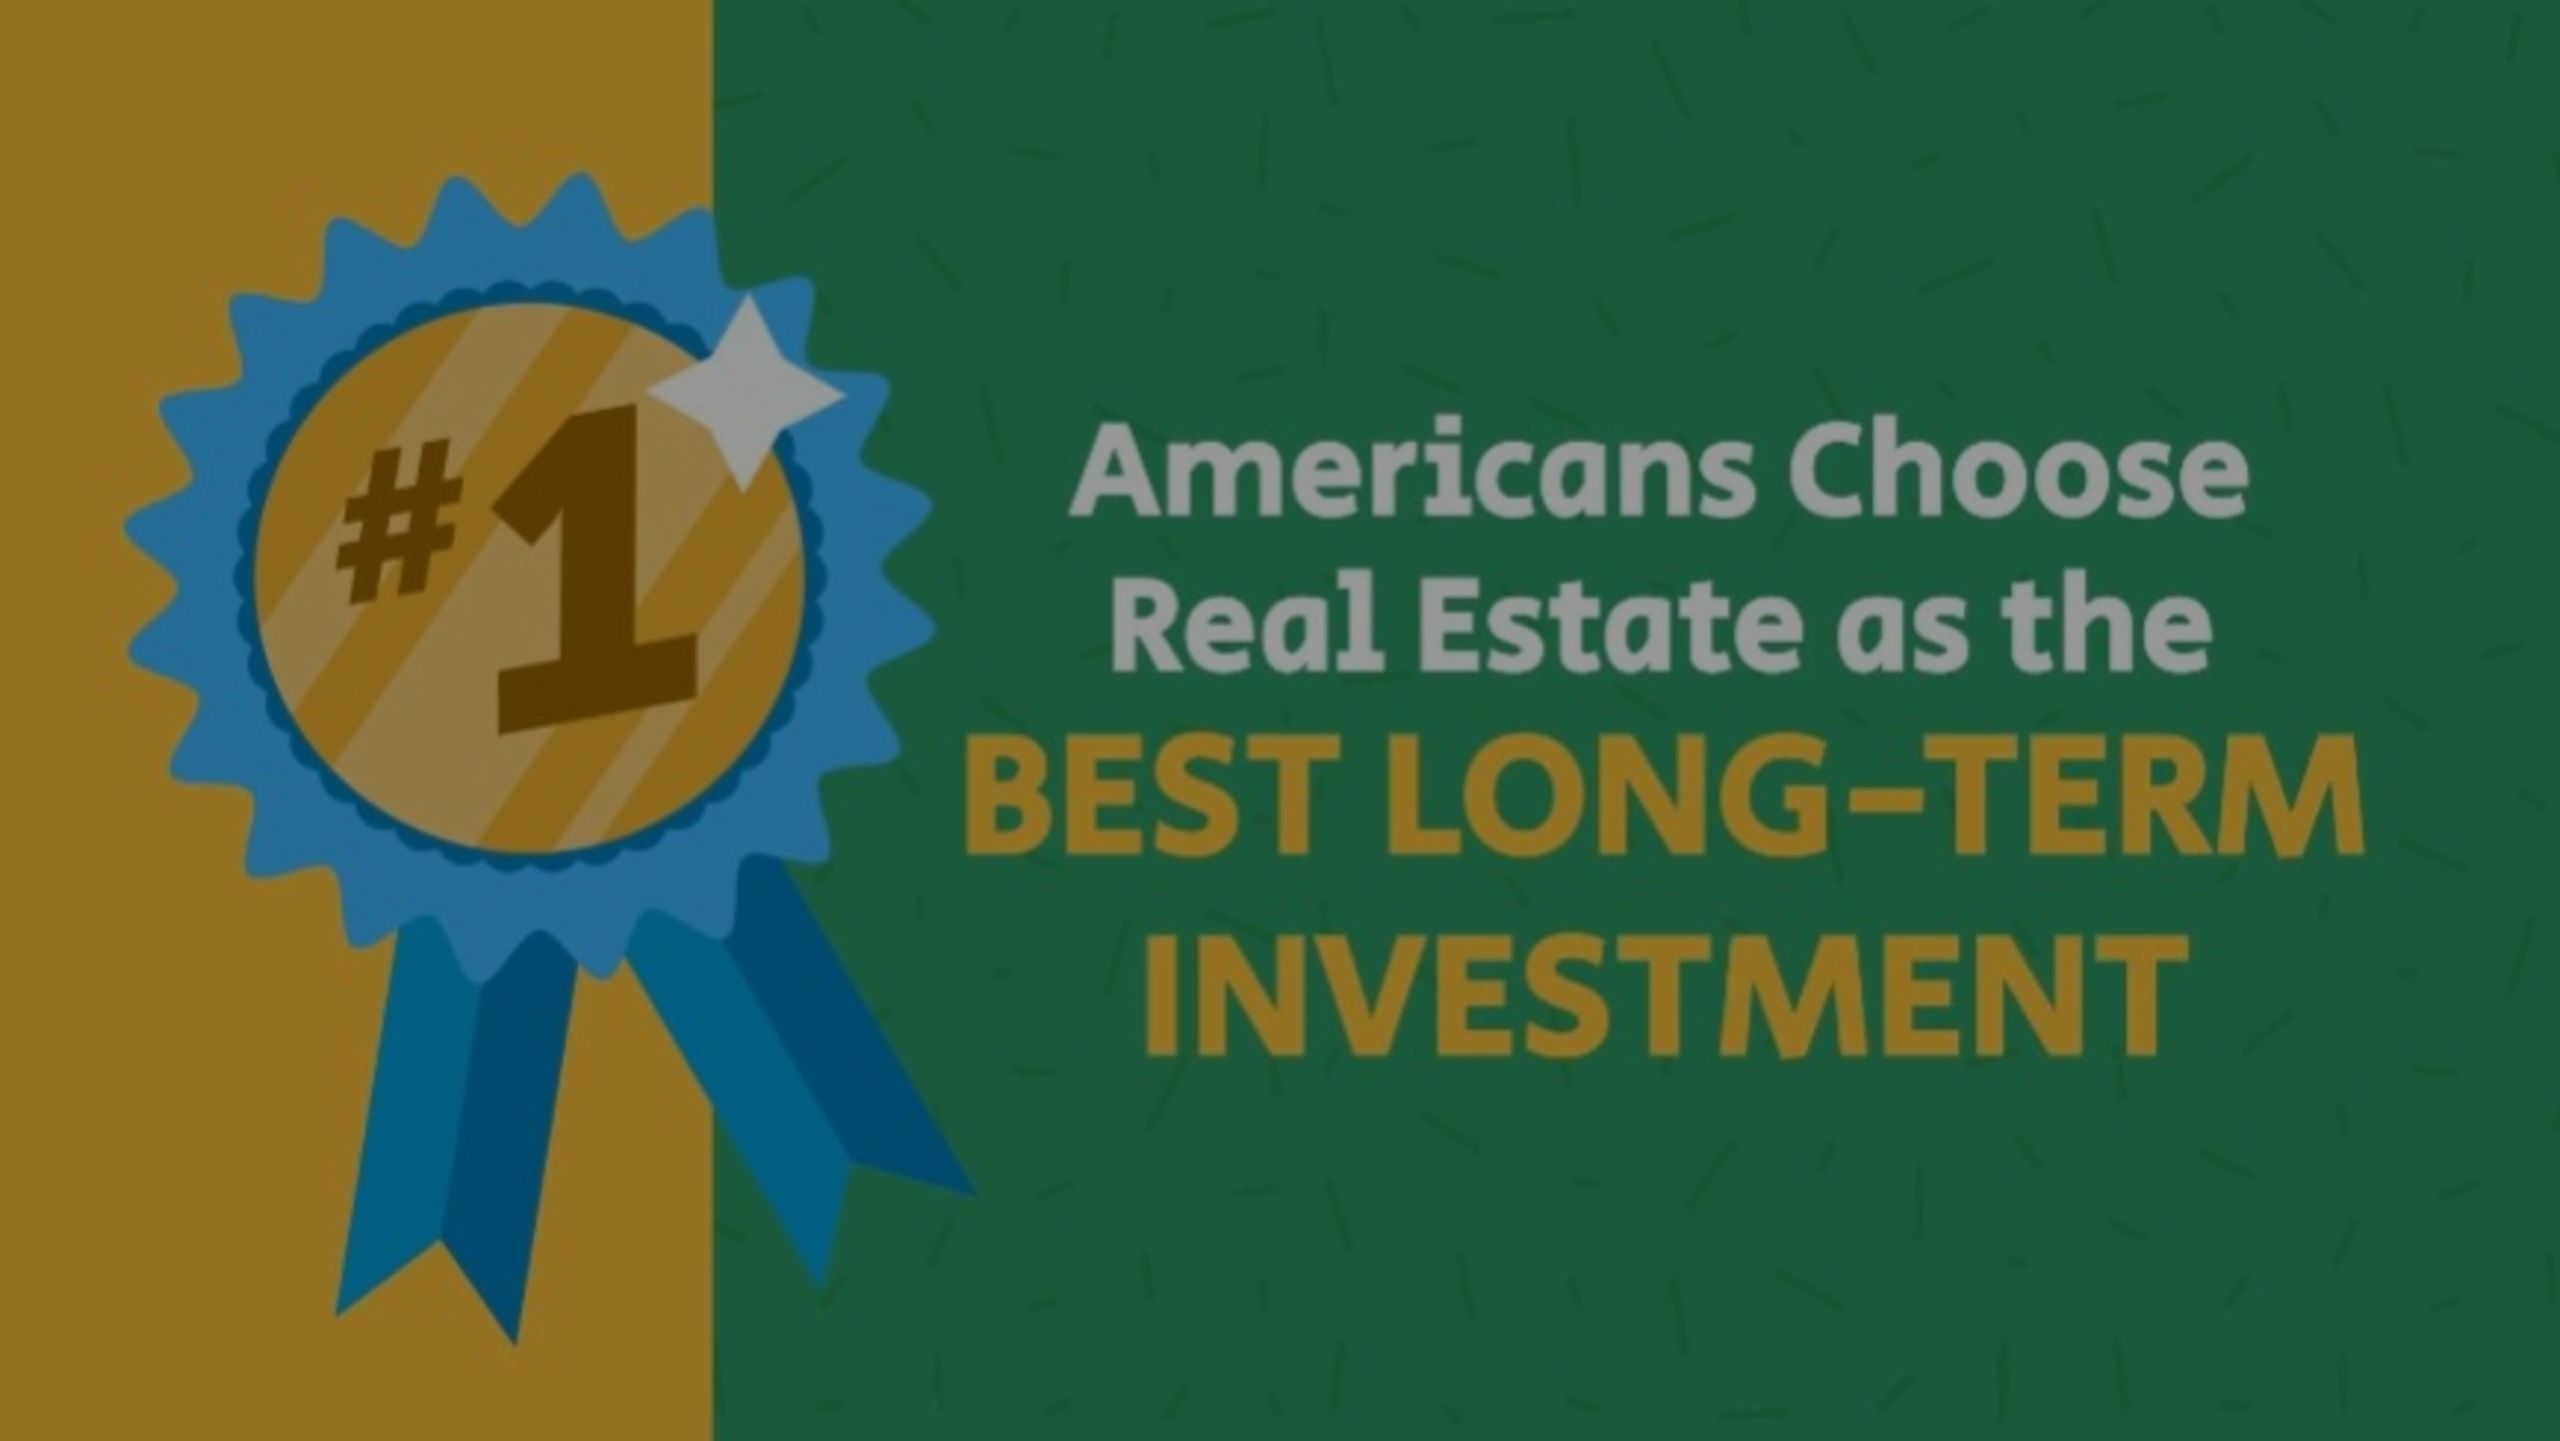 More Americans Choose Real Estate as the Best Long-Term Investment